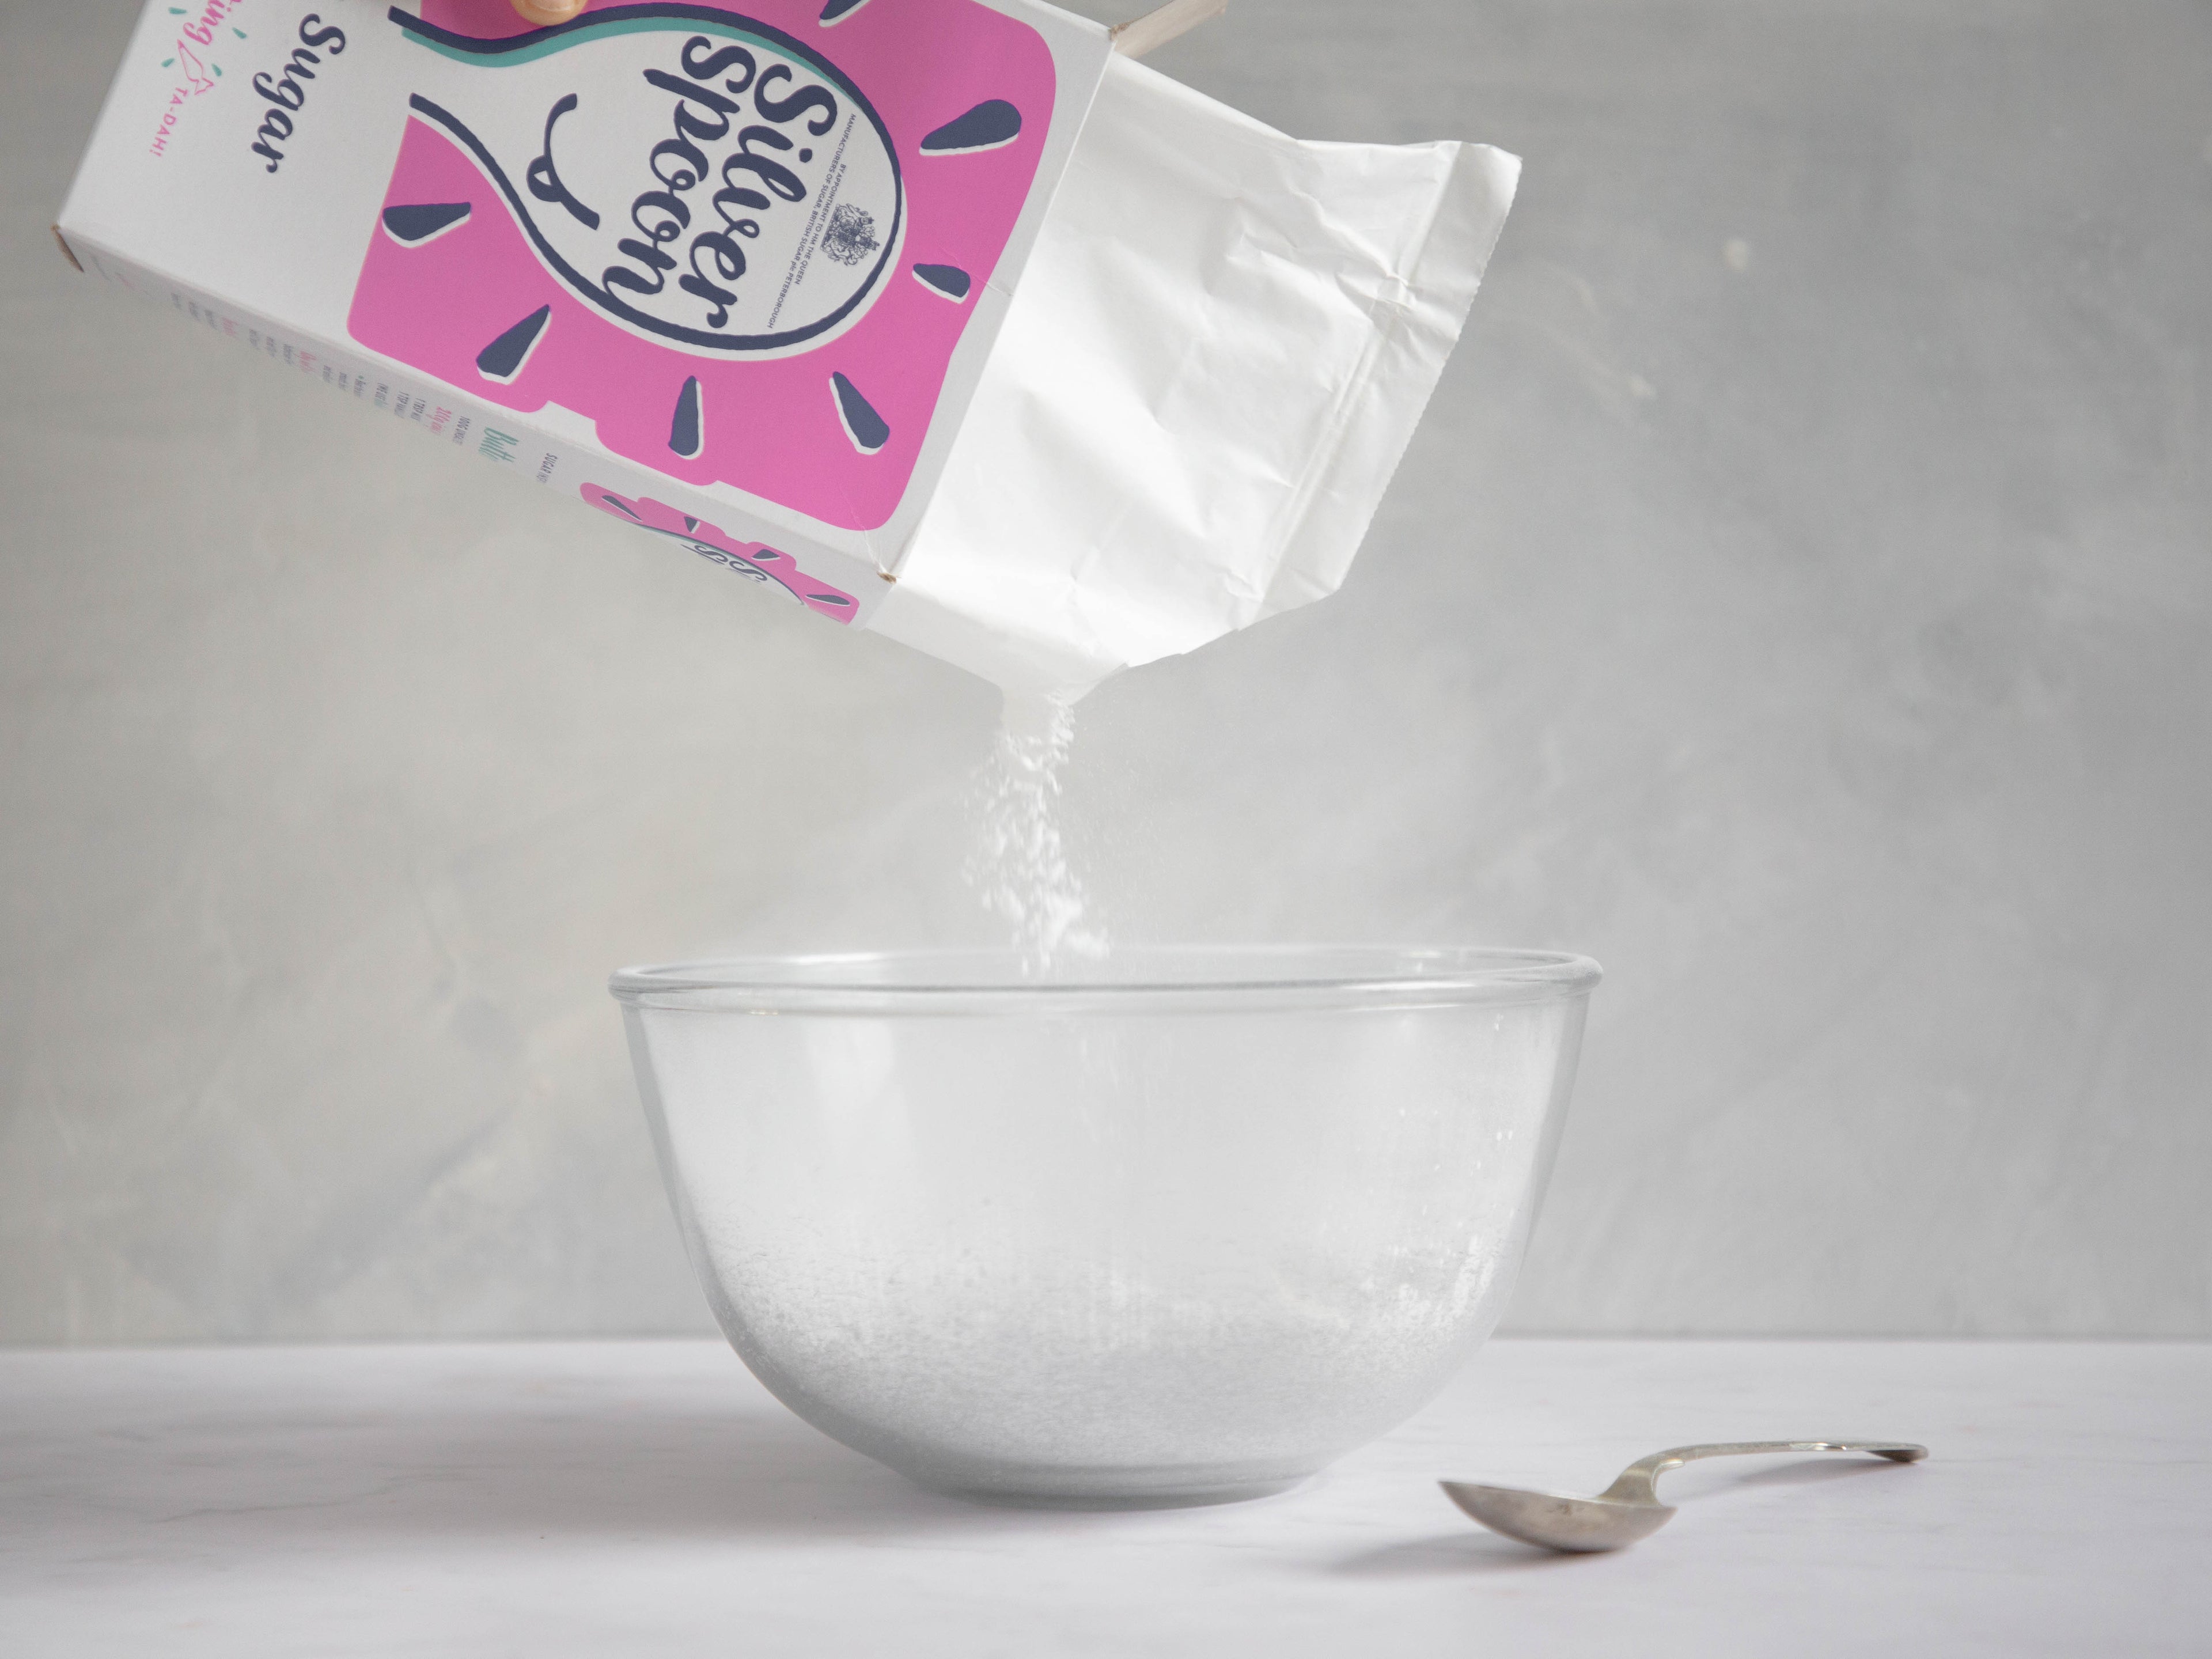 Box of icing sugar tipping sugar out into a glass bowl with a spoon on the side